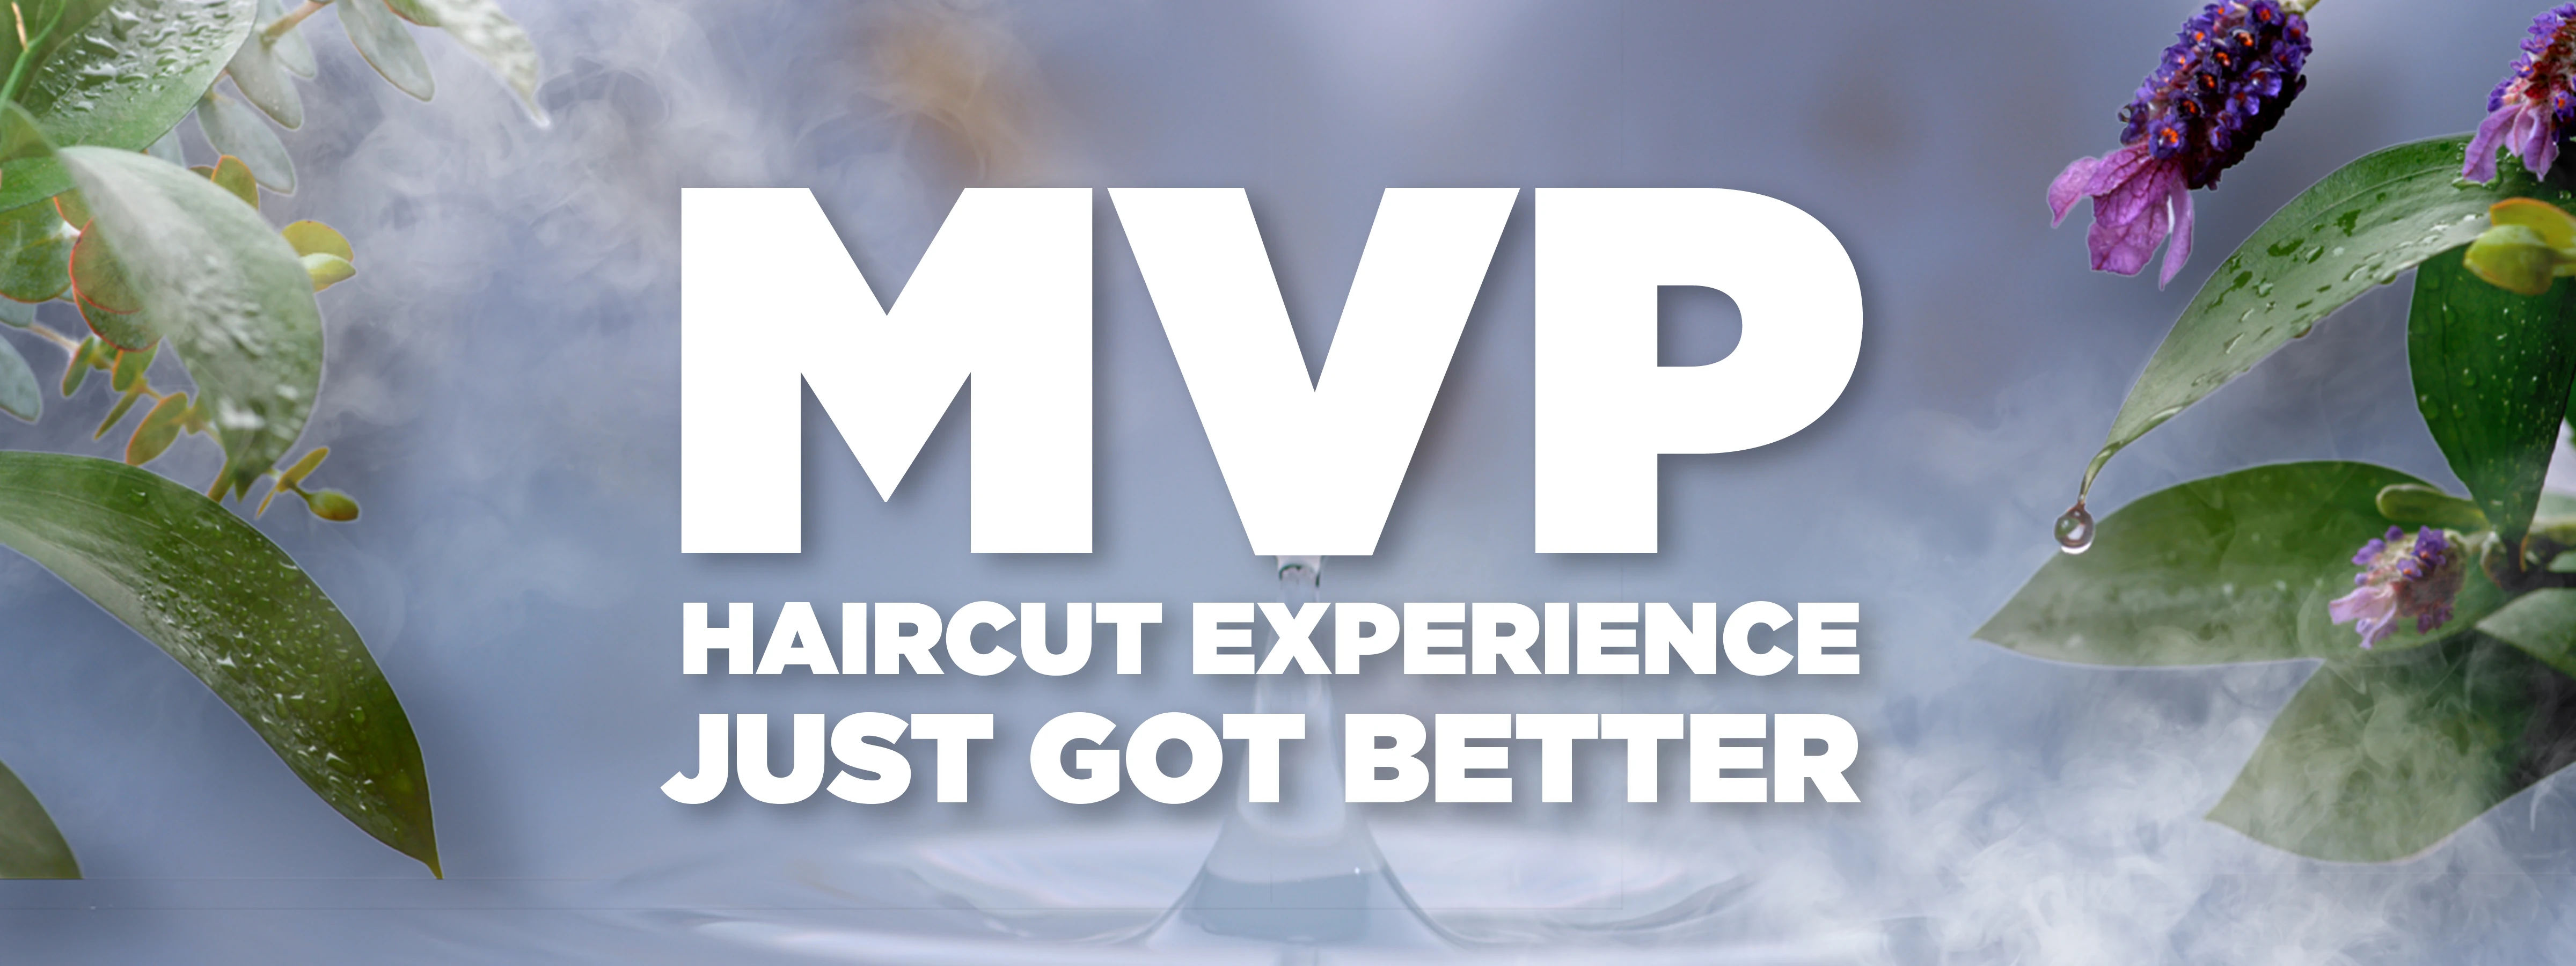 The MVP Haircut Experience Just Got Better